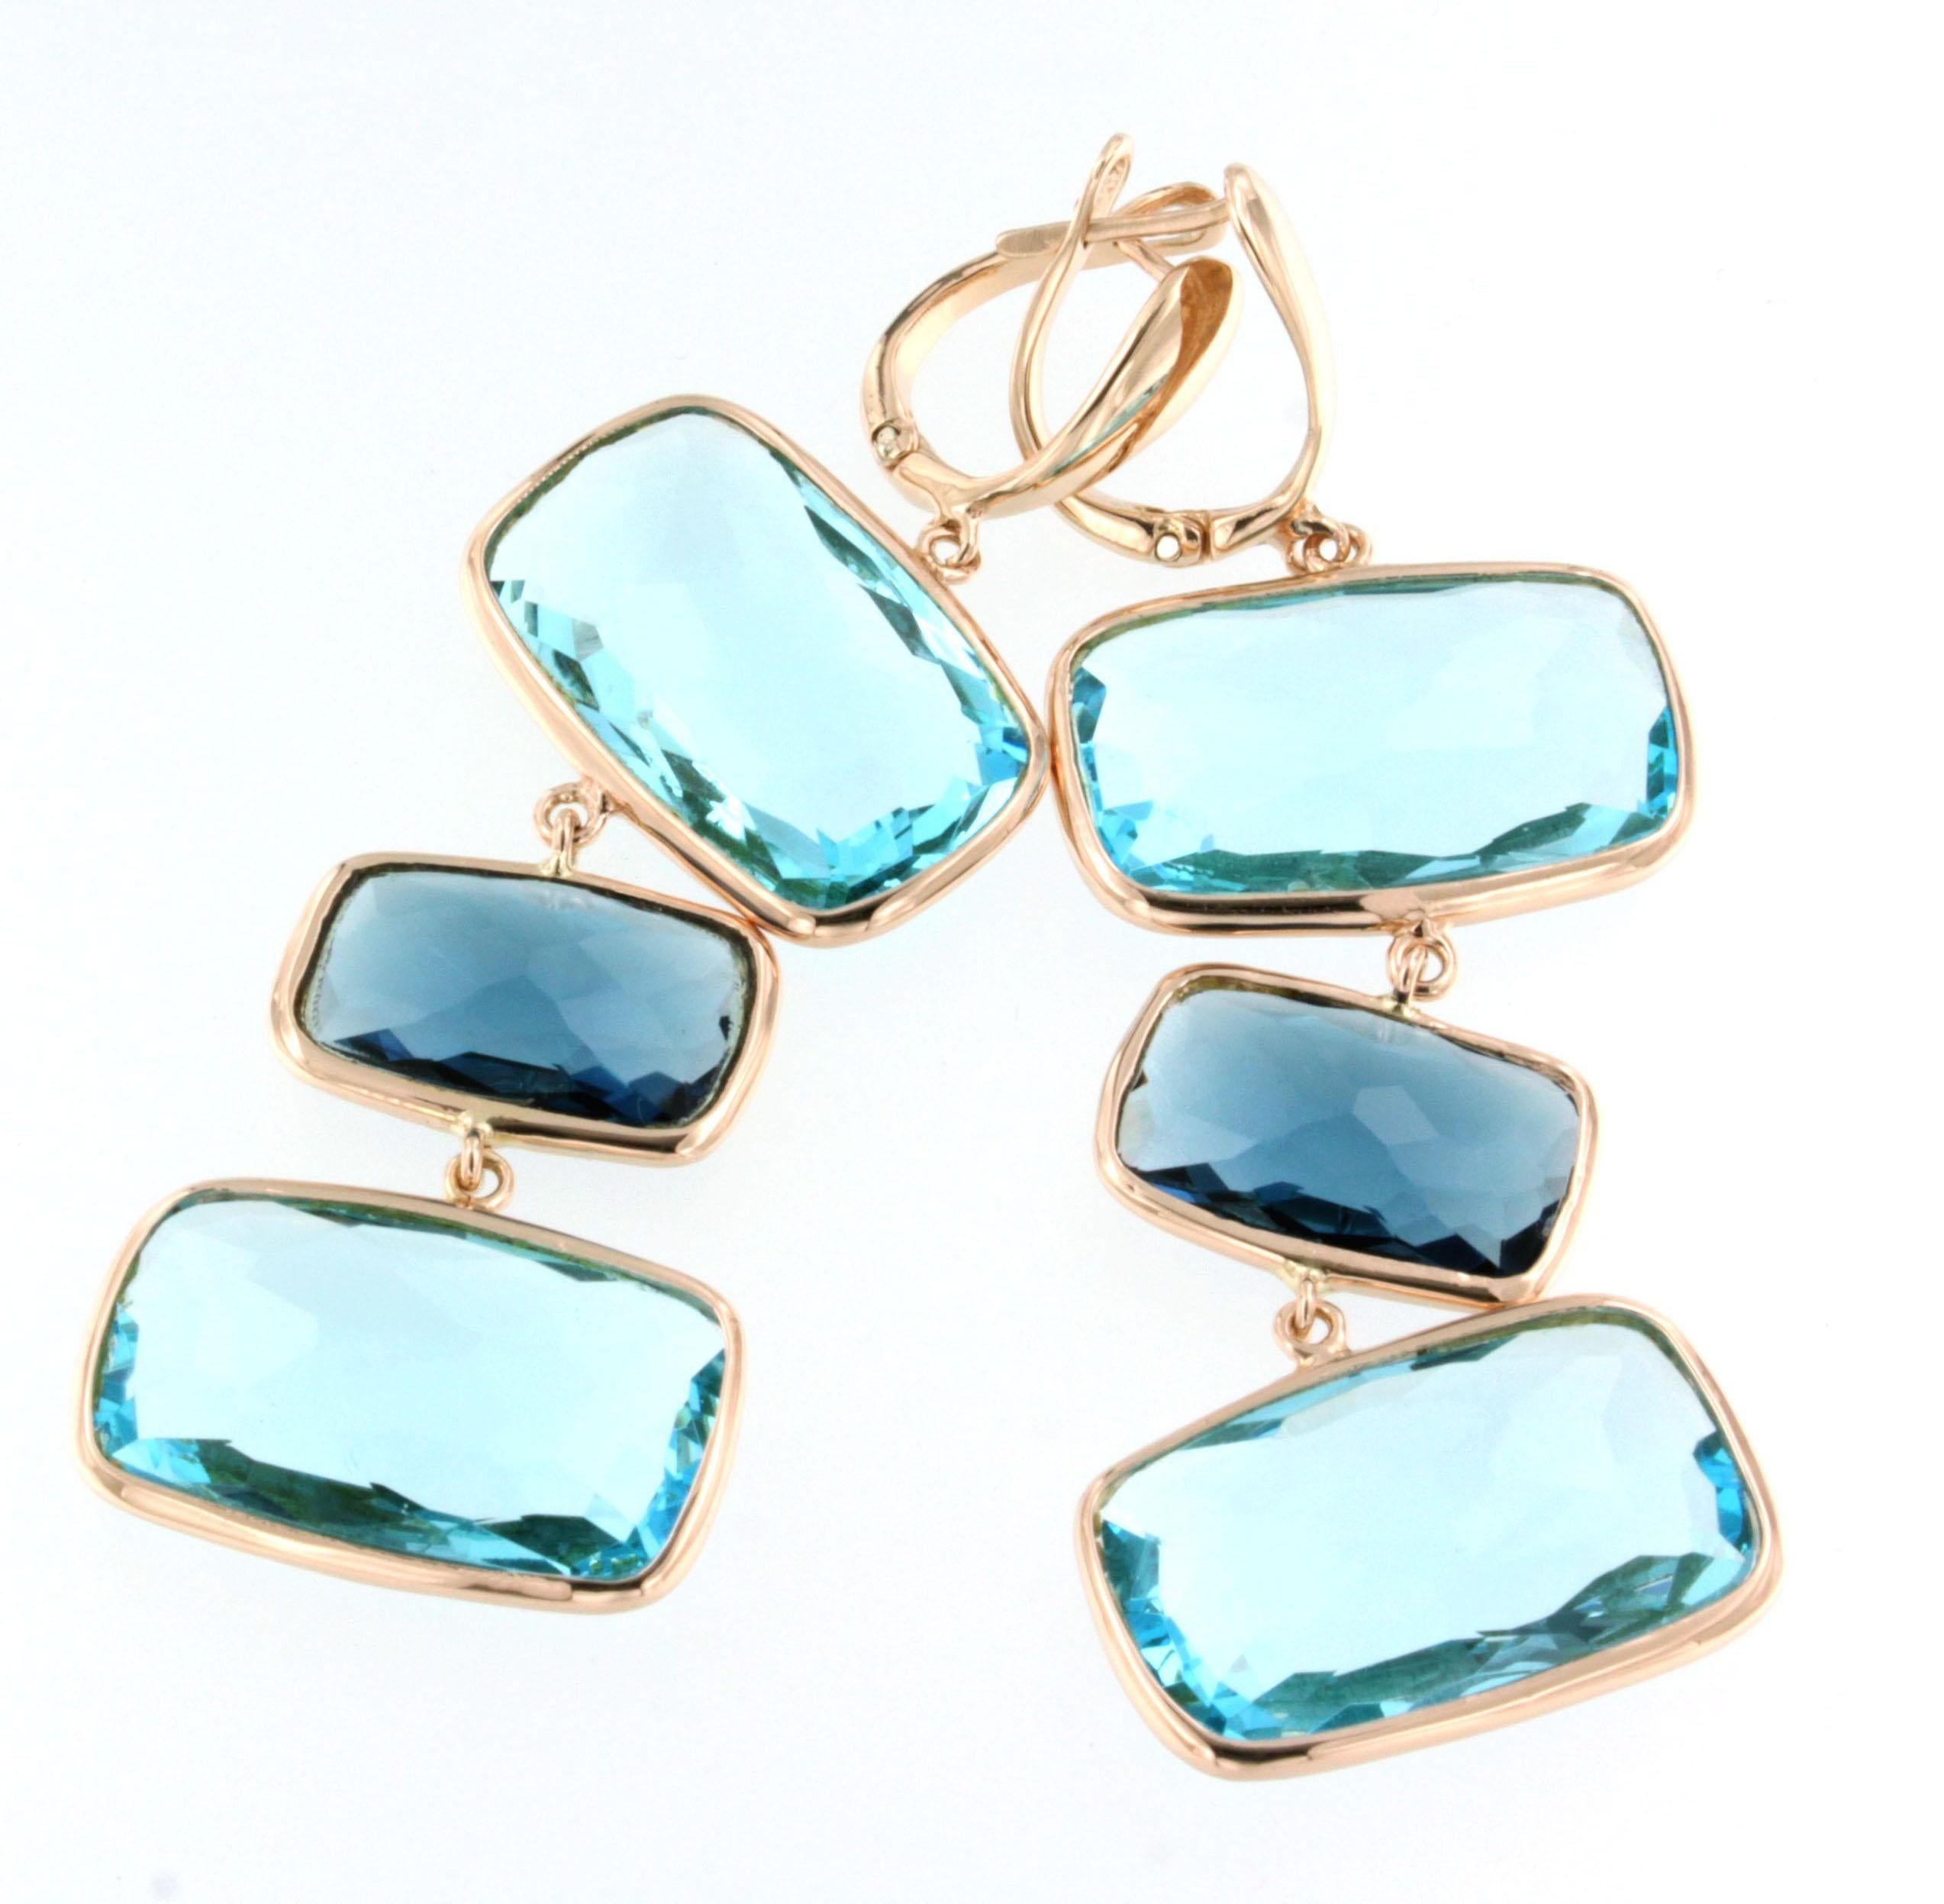 Combination of shapes and colors made a unique fashion and modern amazing earrings in 18k rose gold with colored stones: blue Topaz and London Topaz. Made in Italy by Stanoppi Jewellery since 1948.

(big rectangular cut, size:12x22 mm; rectangular